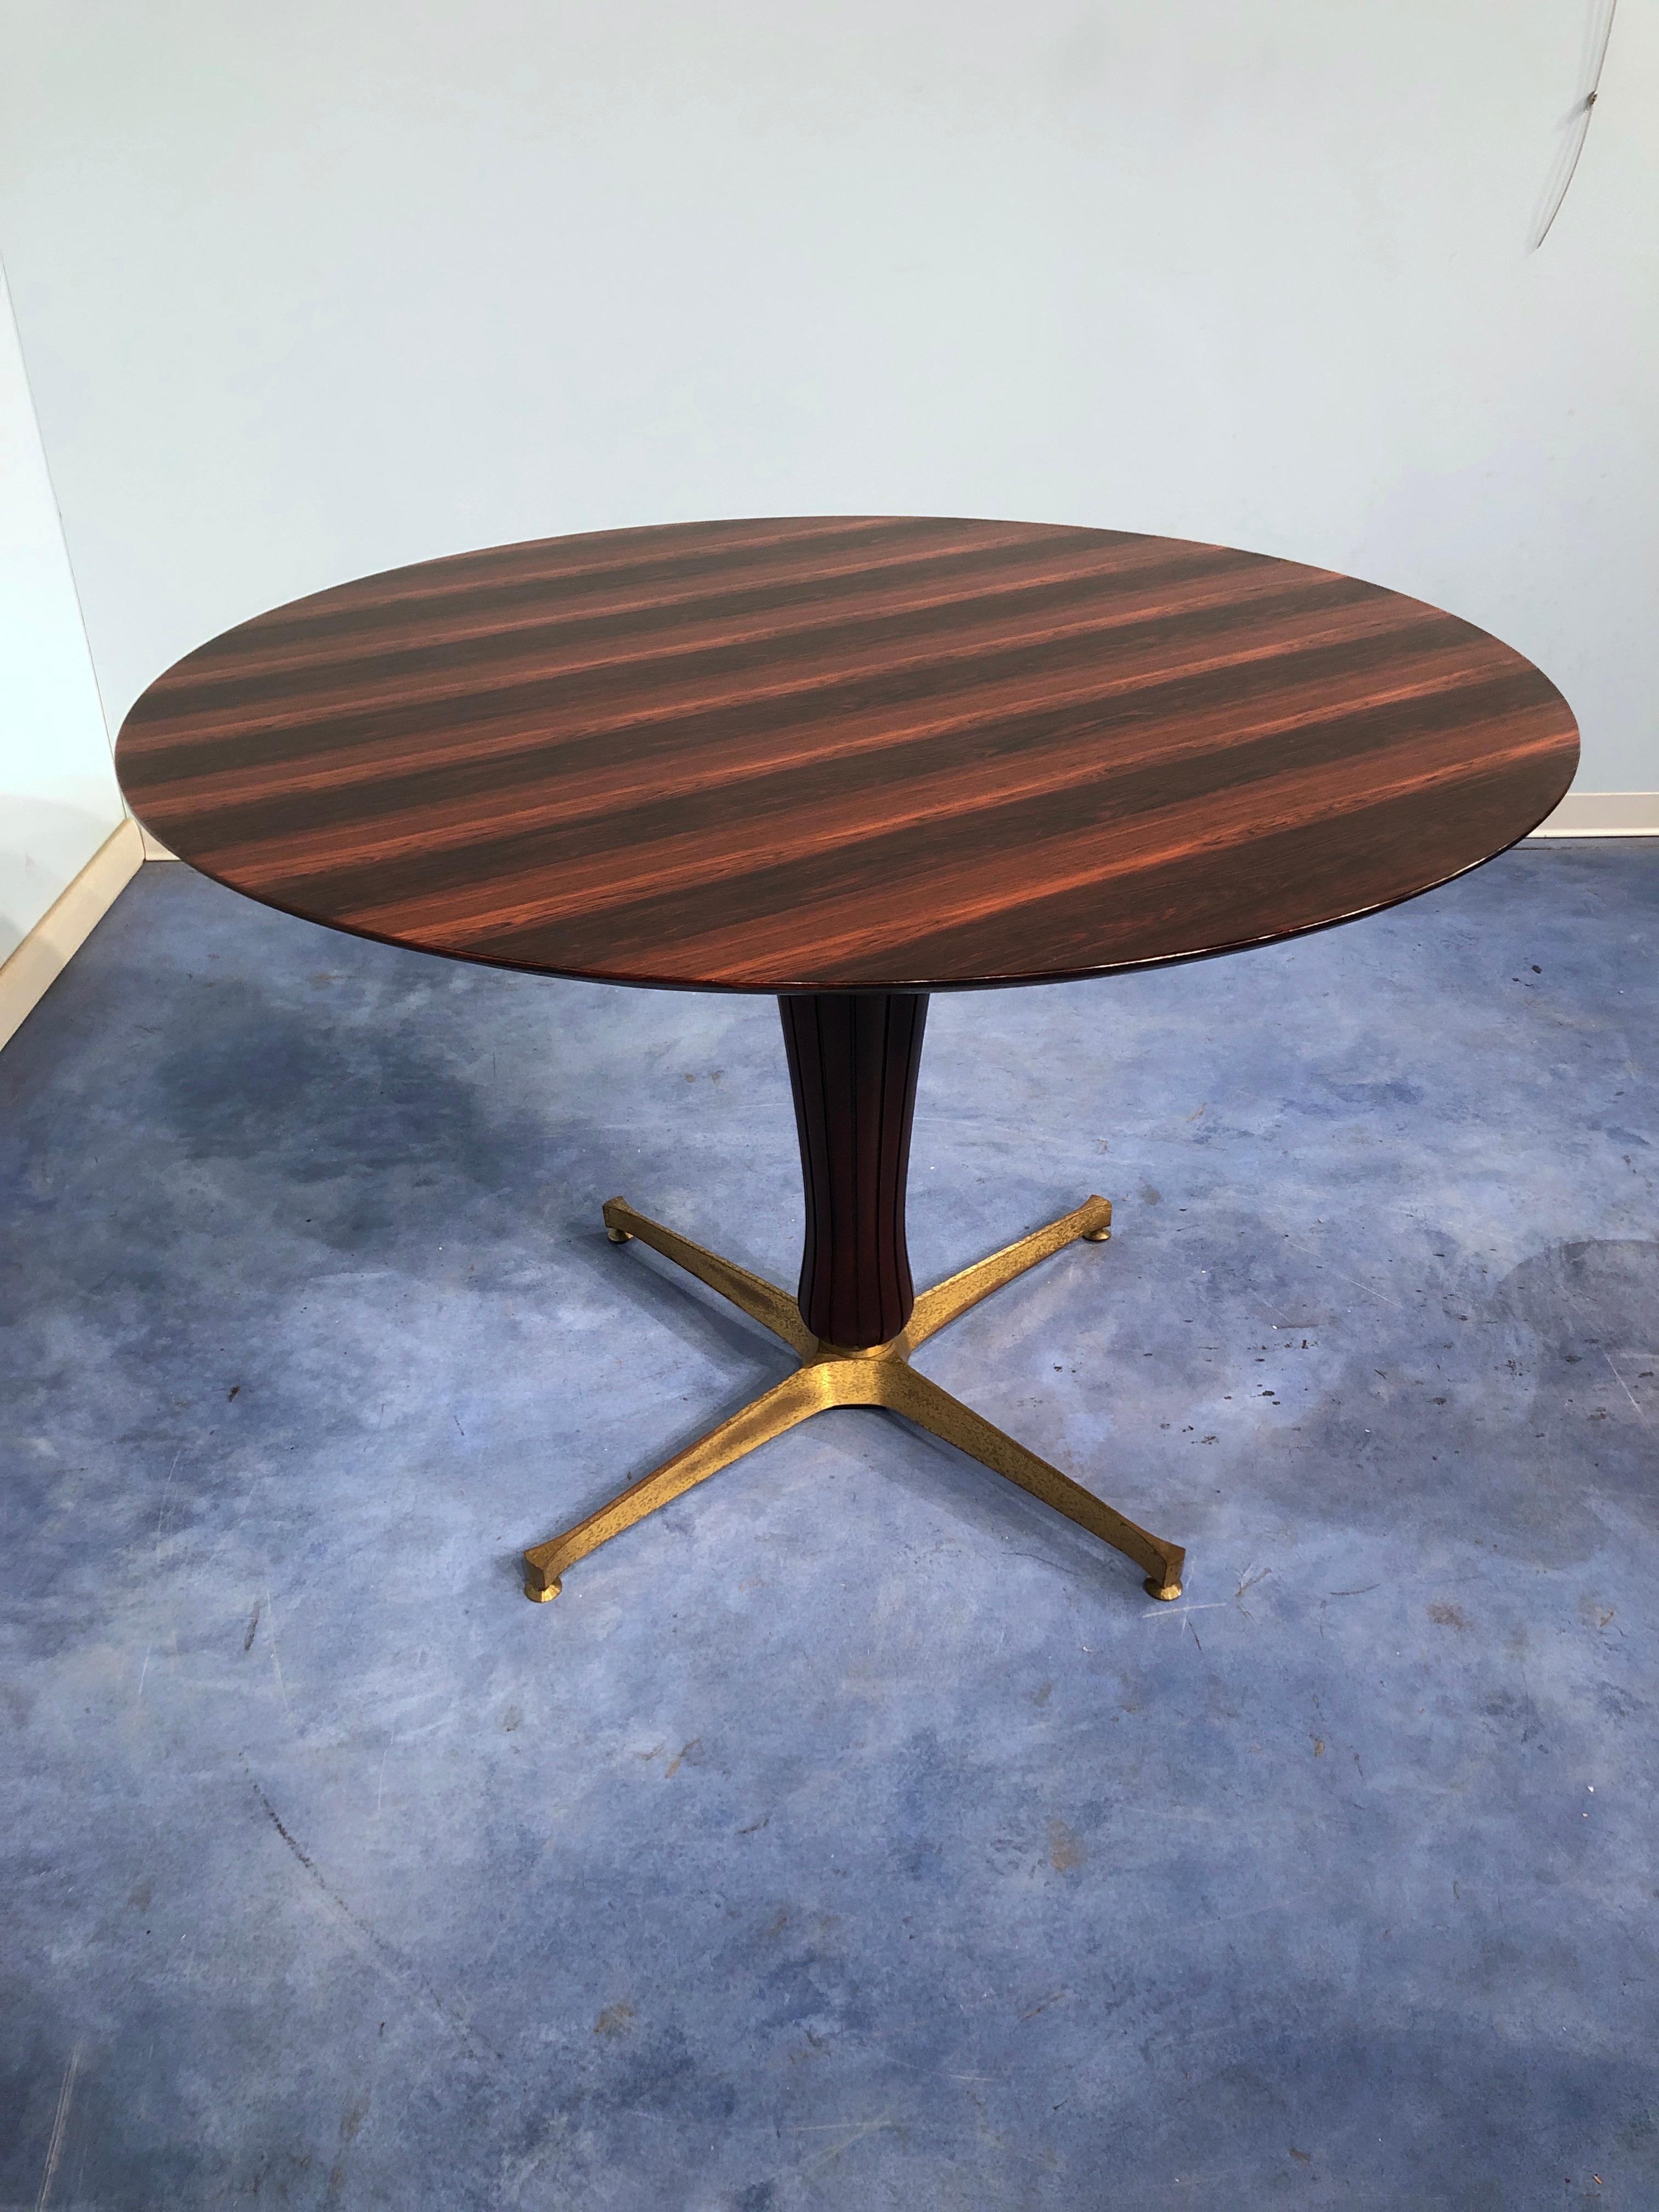 Mid-20th Century Italian Midcentury Teak Table Attributed to Paolo Buffa, 1950s For Sale